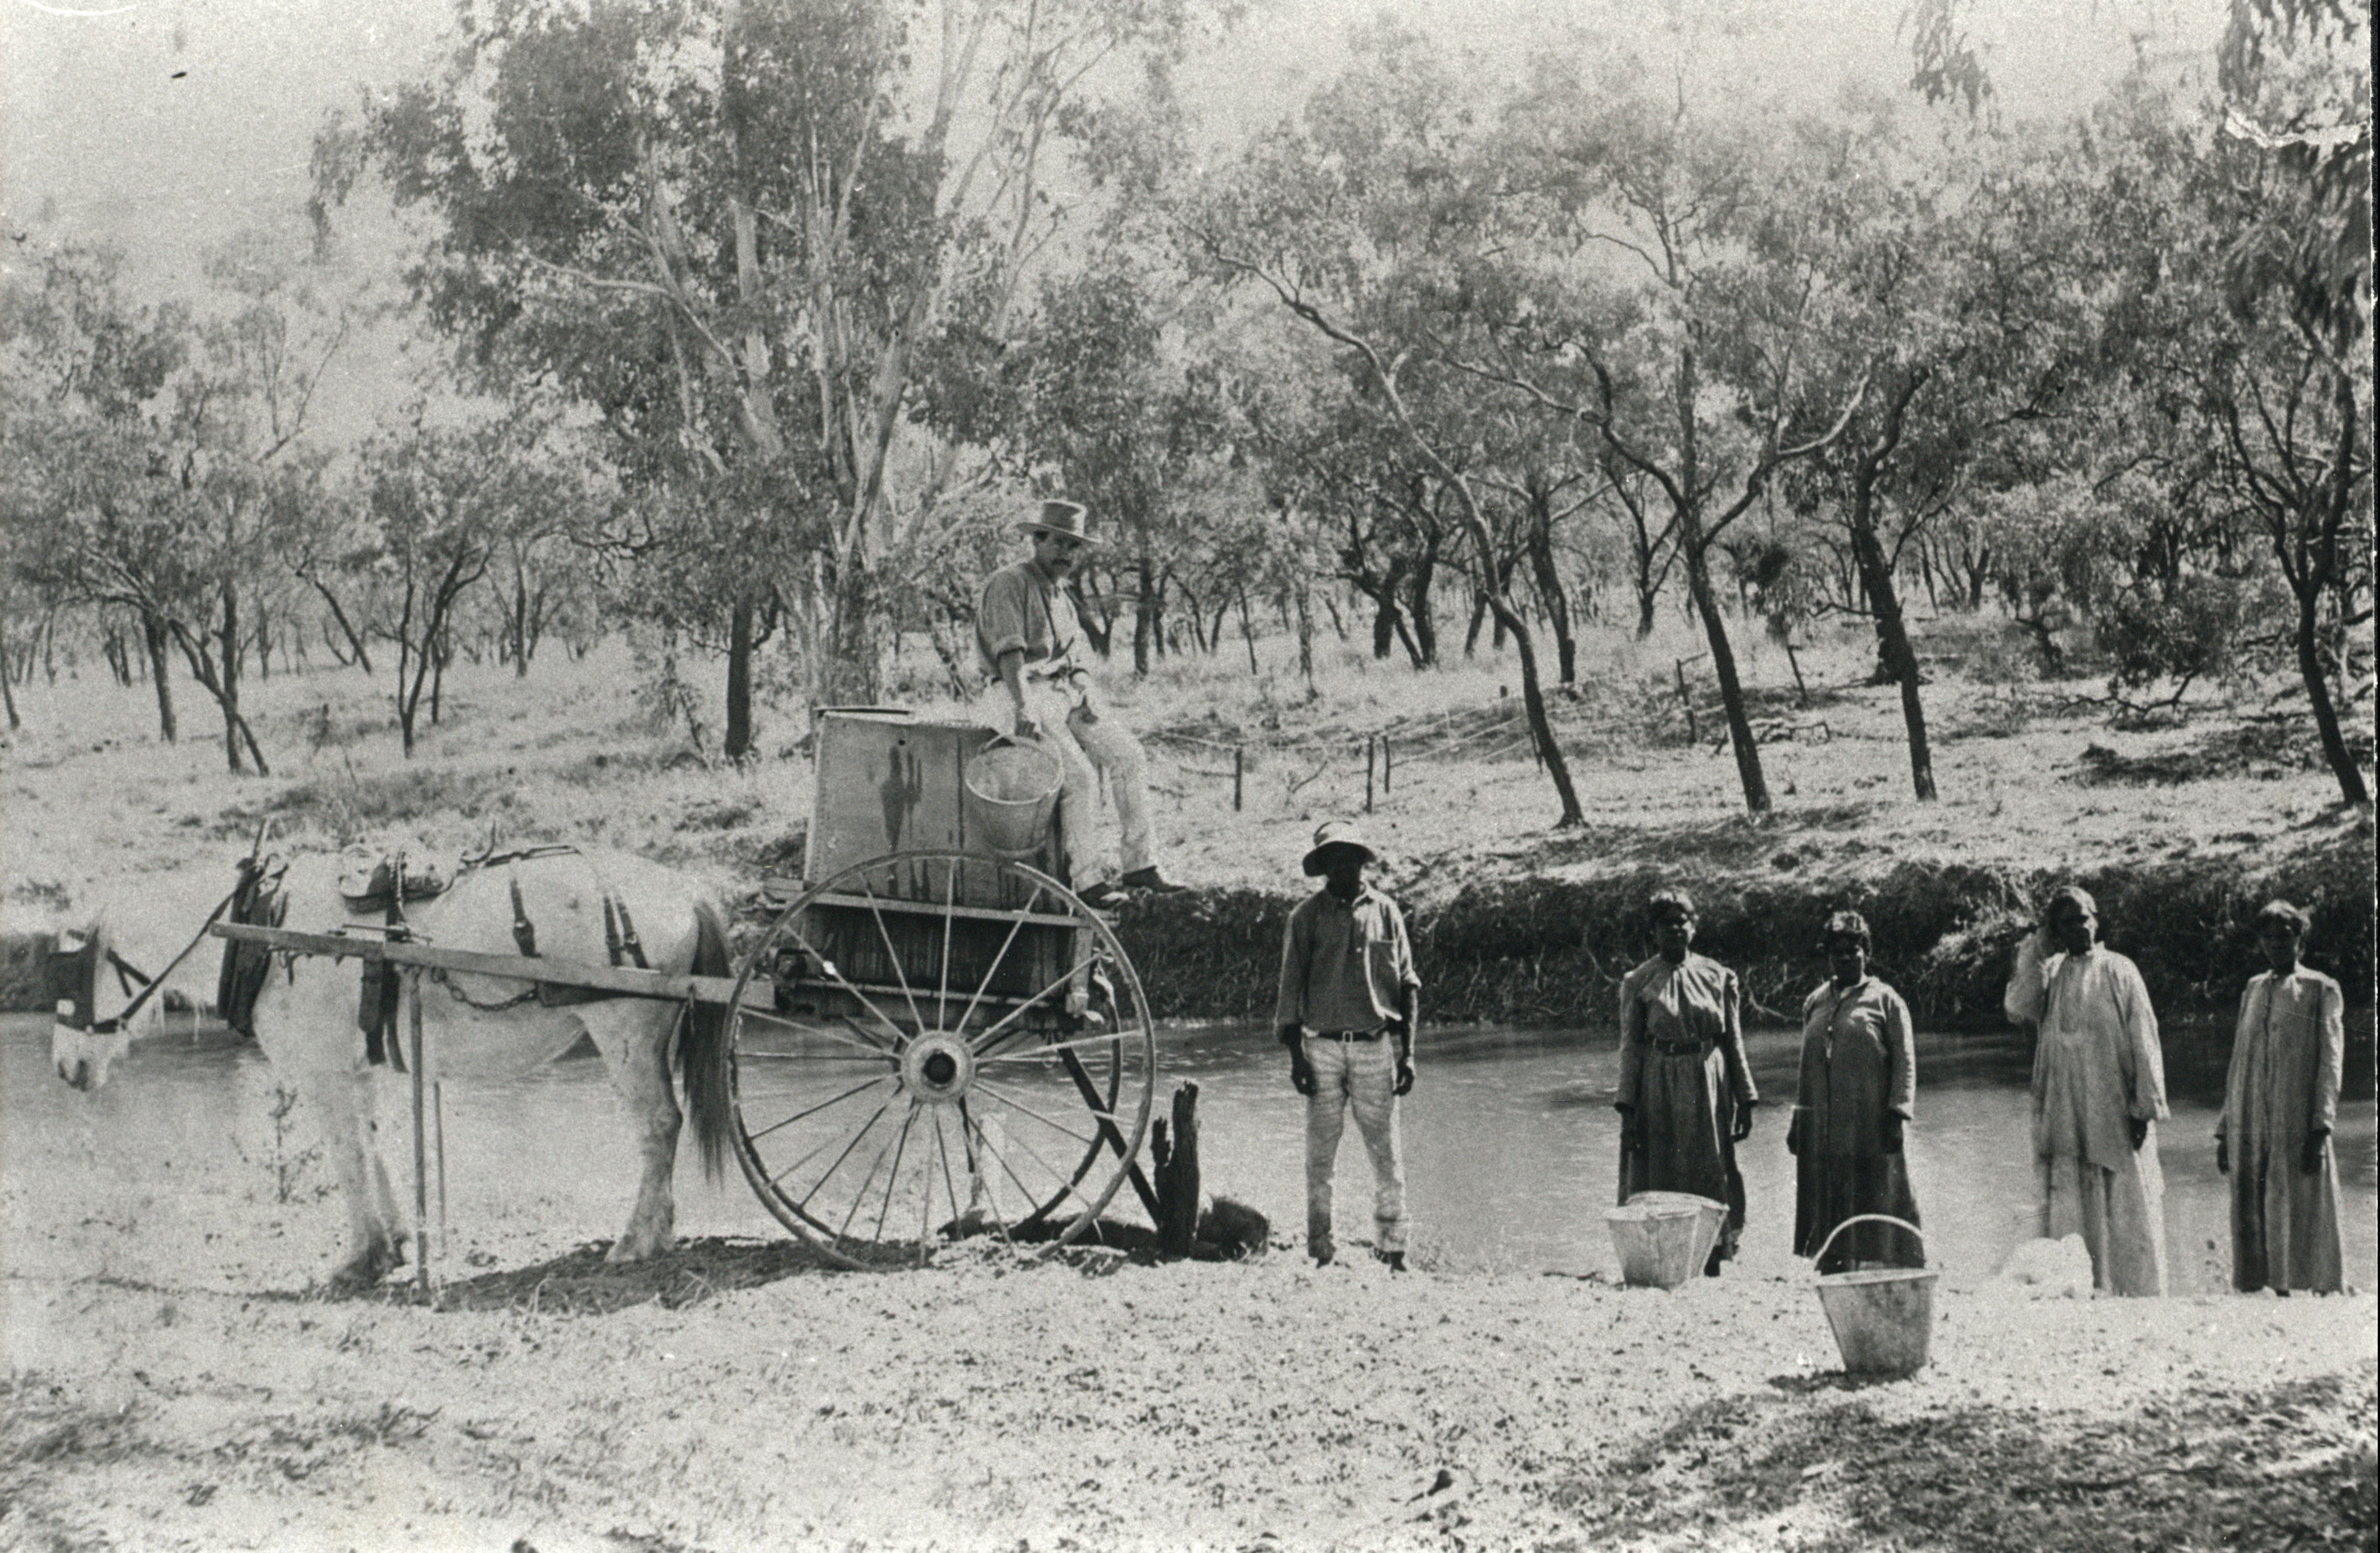 Workers drawing water from the river, Canobie Station, Queensland, 1895 (Z241-211). 